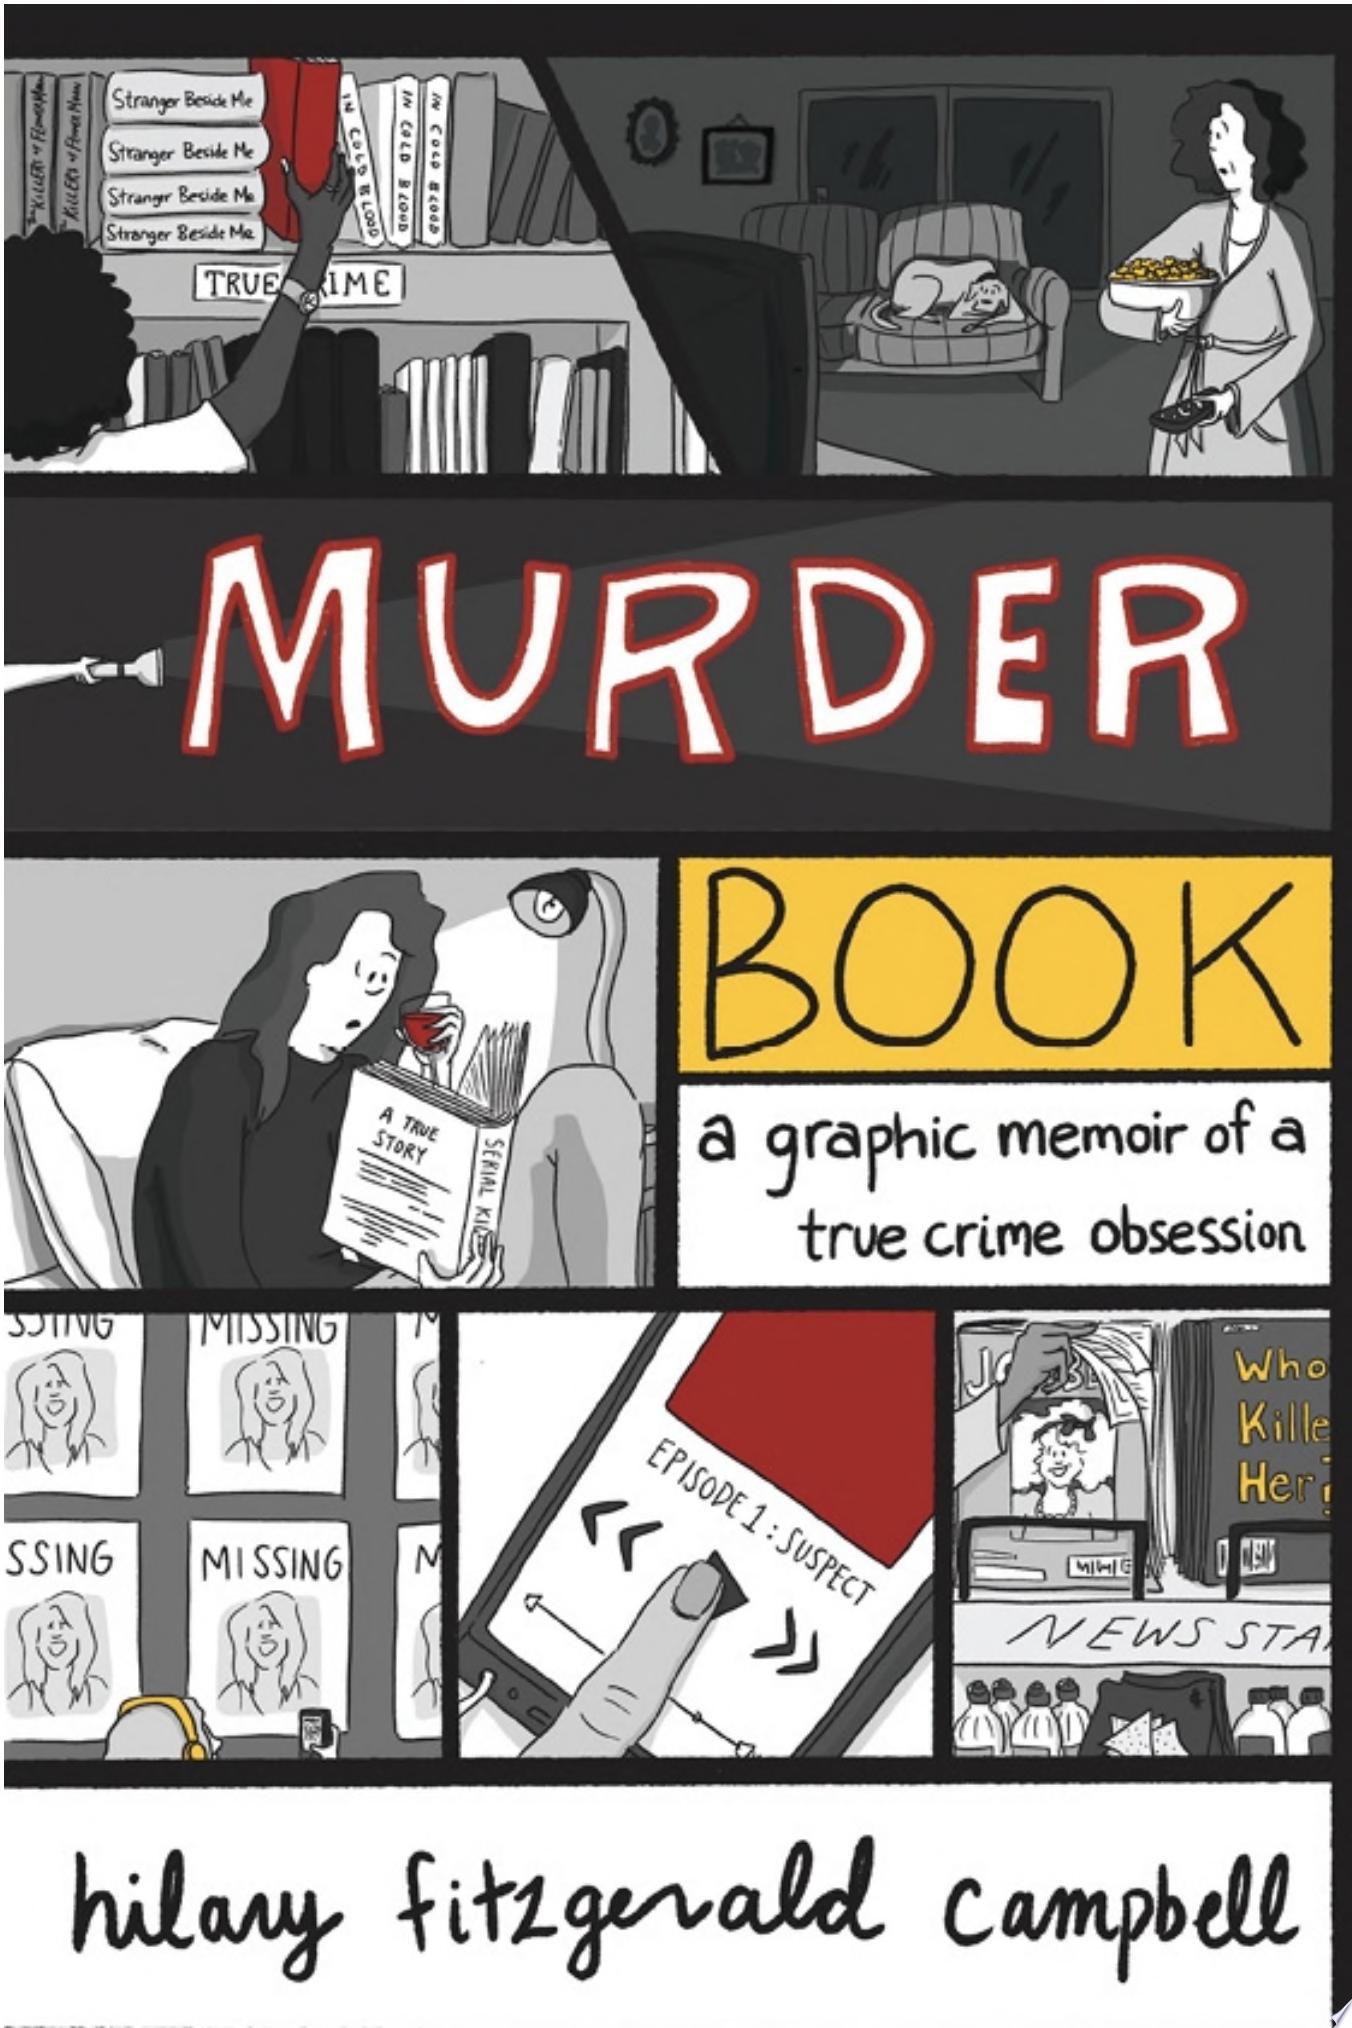 Image for "Murder Book"